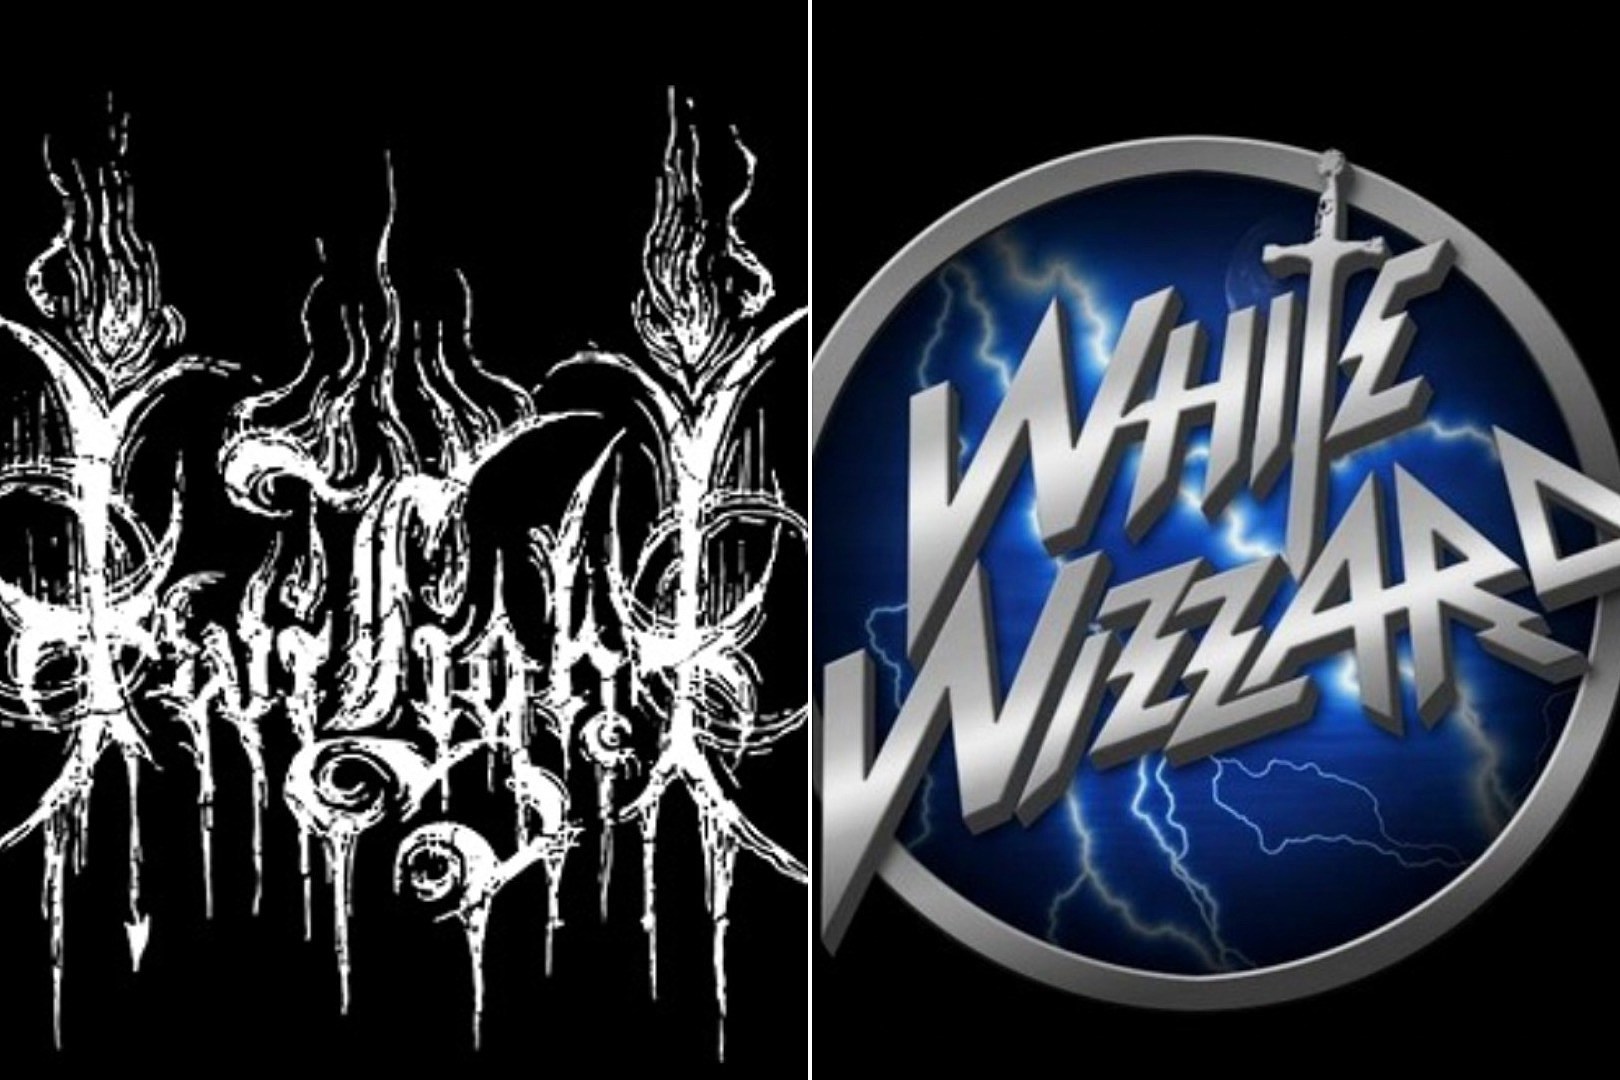 Can You Guess a Metal Band's Subgenre Based on Their Logo?